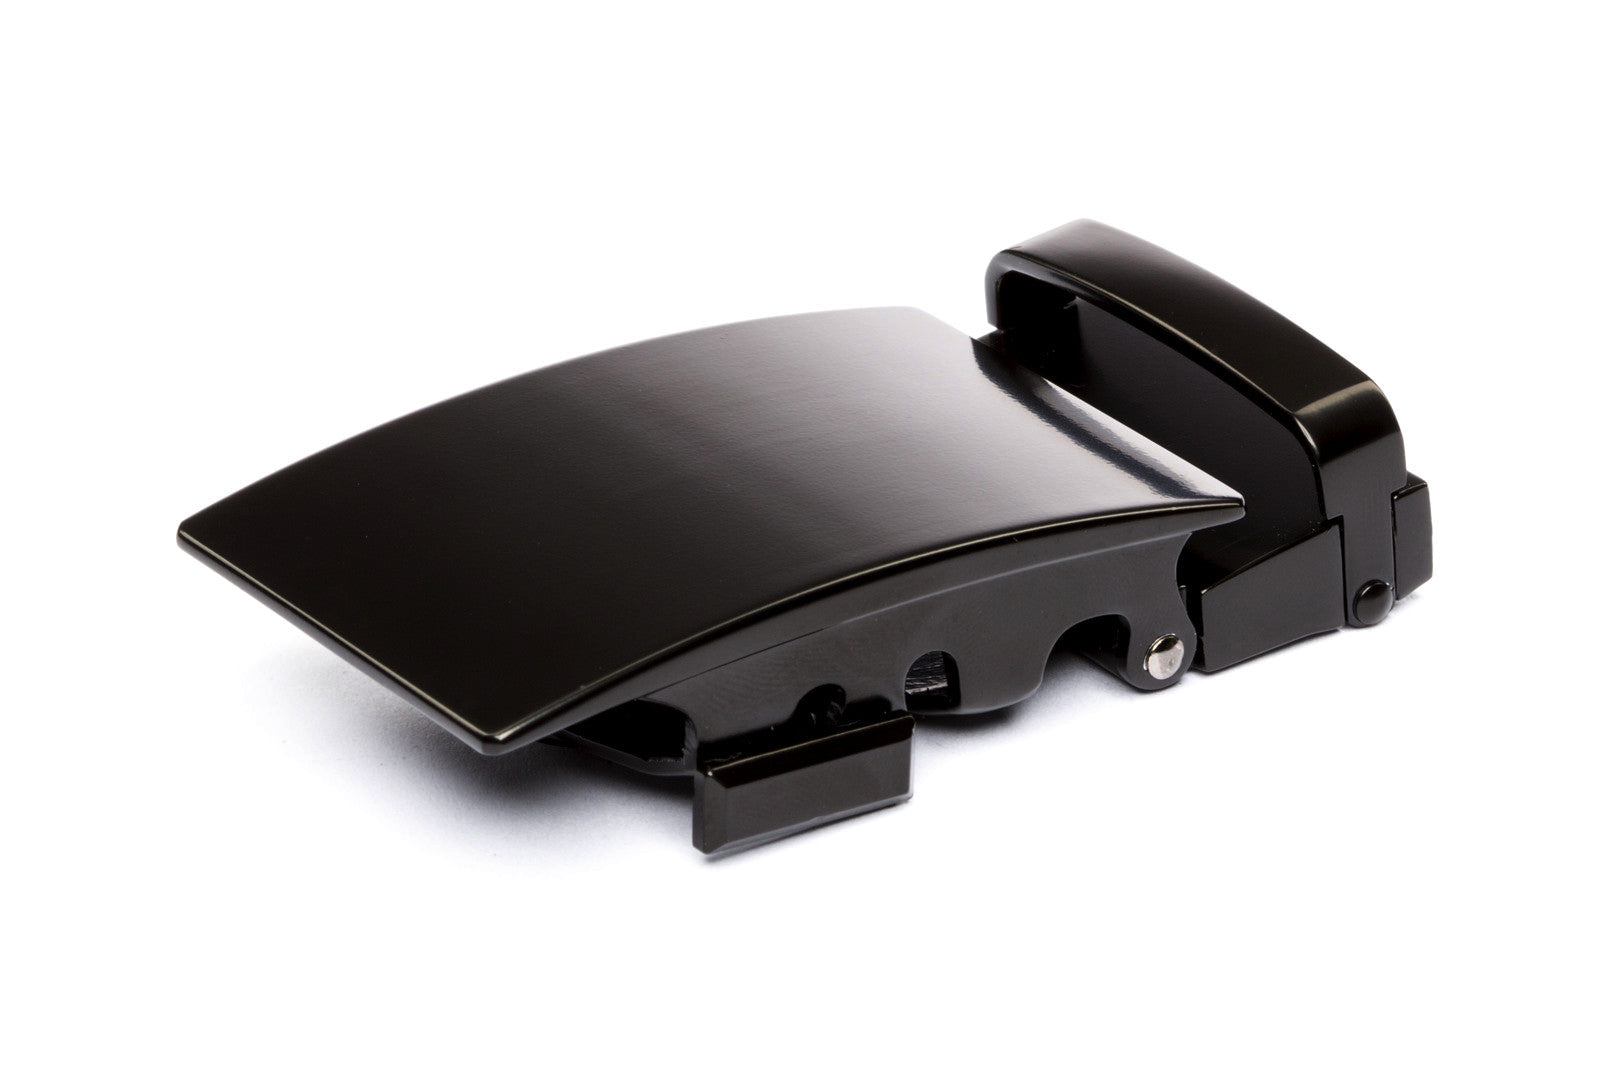 Men's classic ratchet belt buckle in black with a width of 1.5 inches.